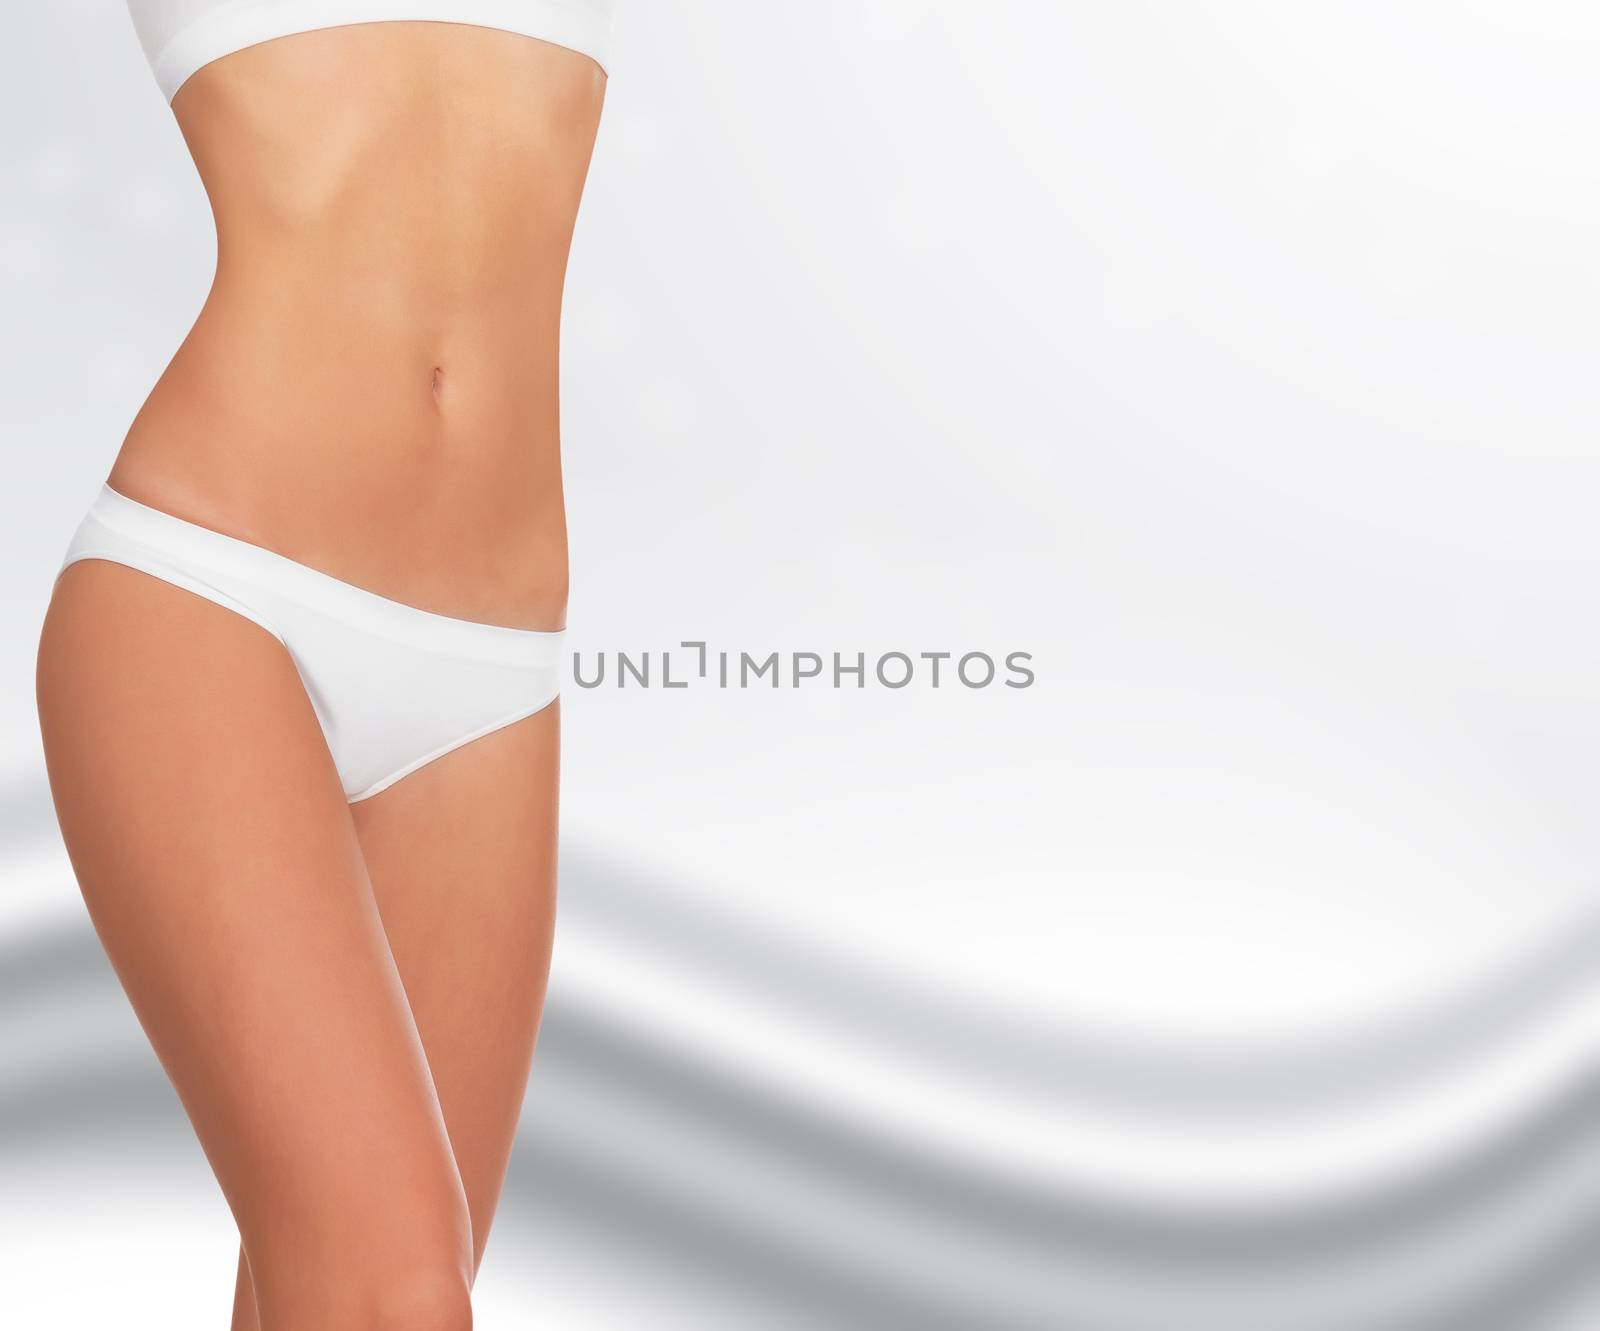 Slim woman body against an abstract background